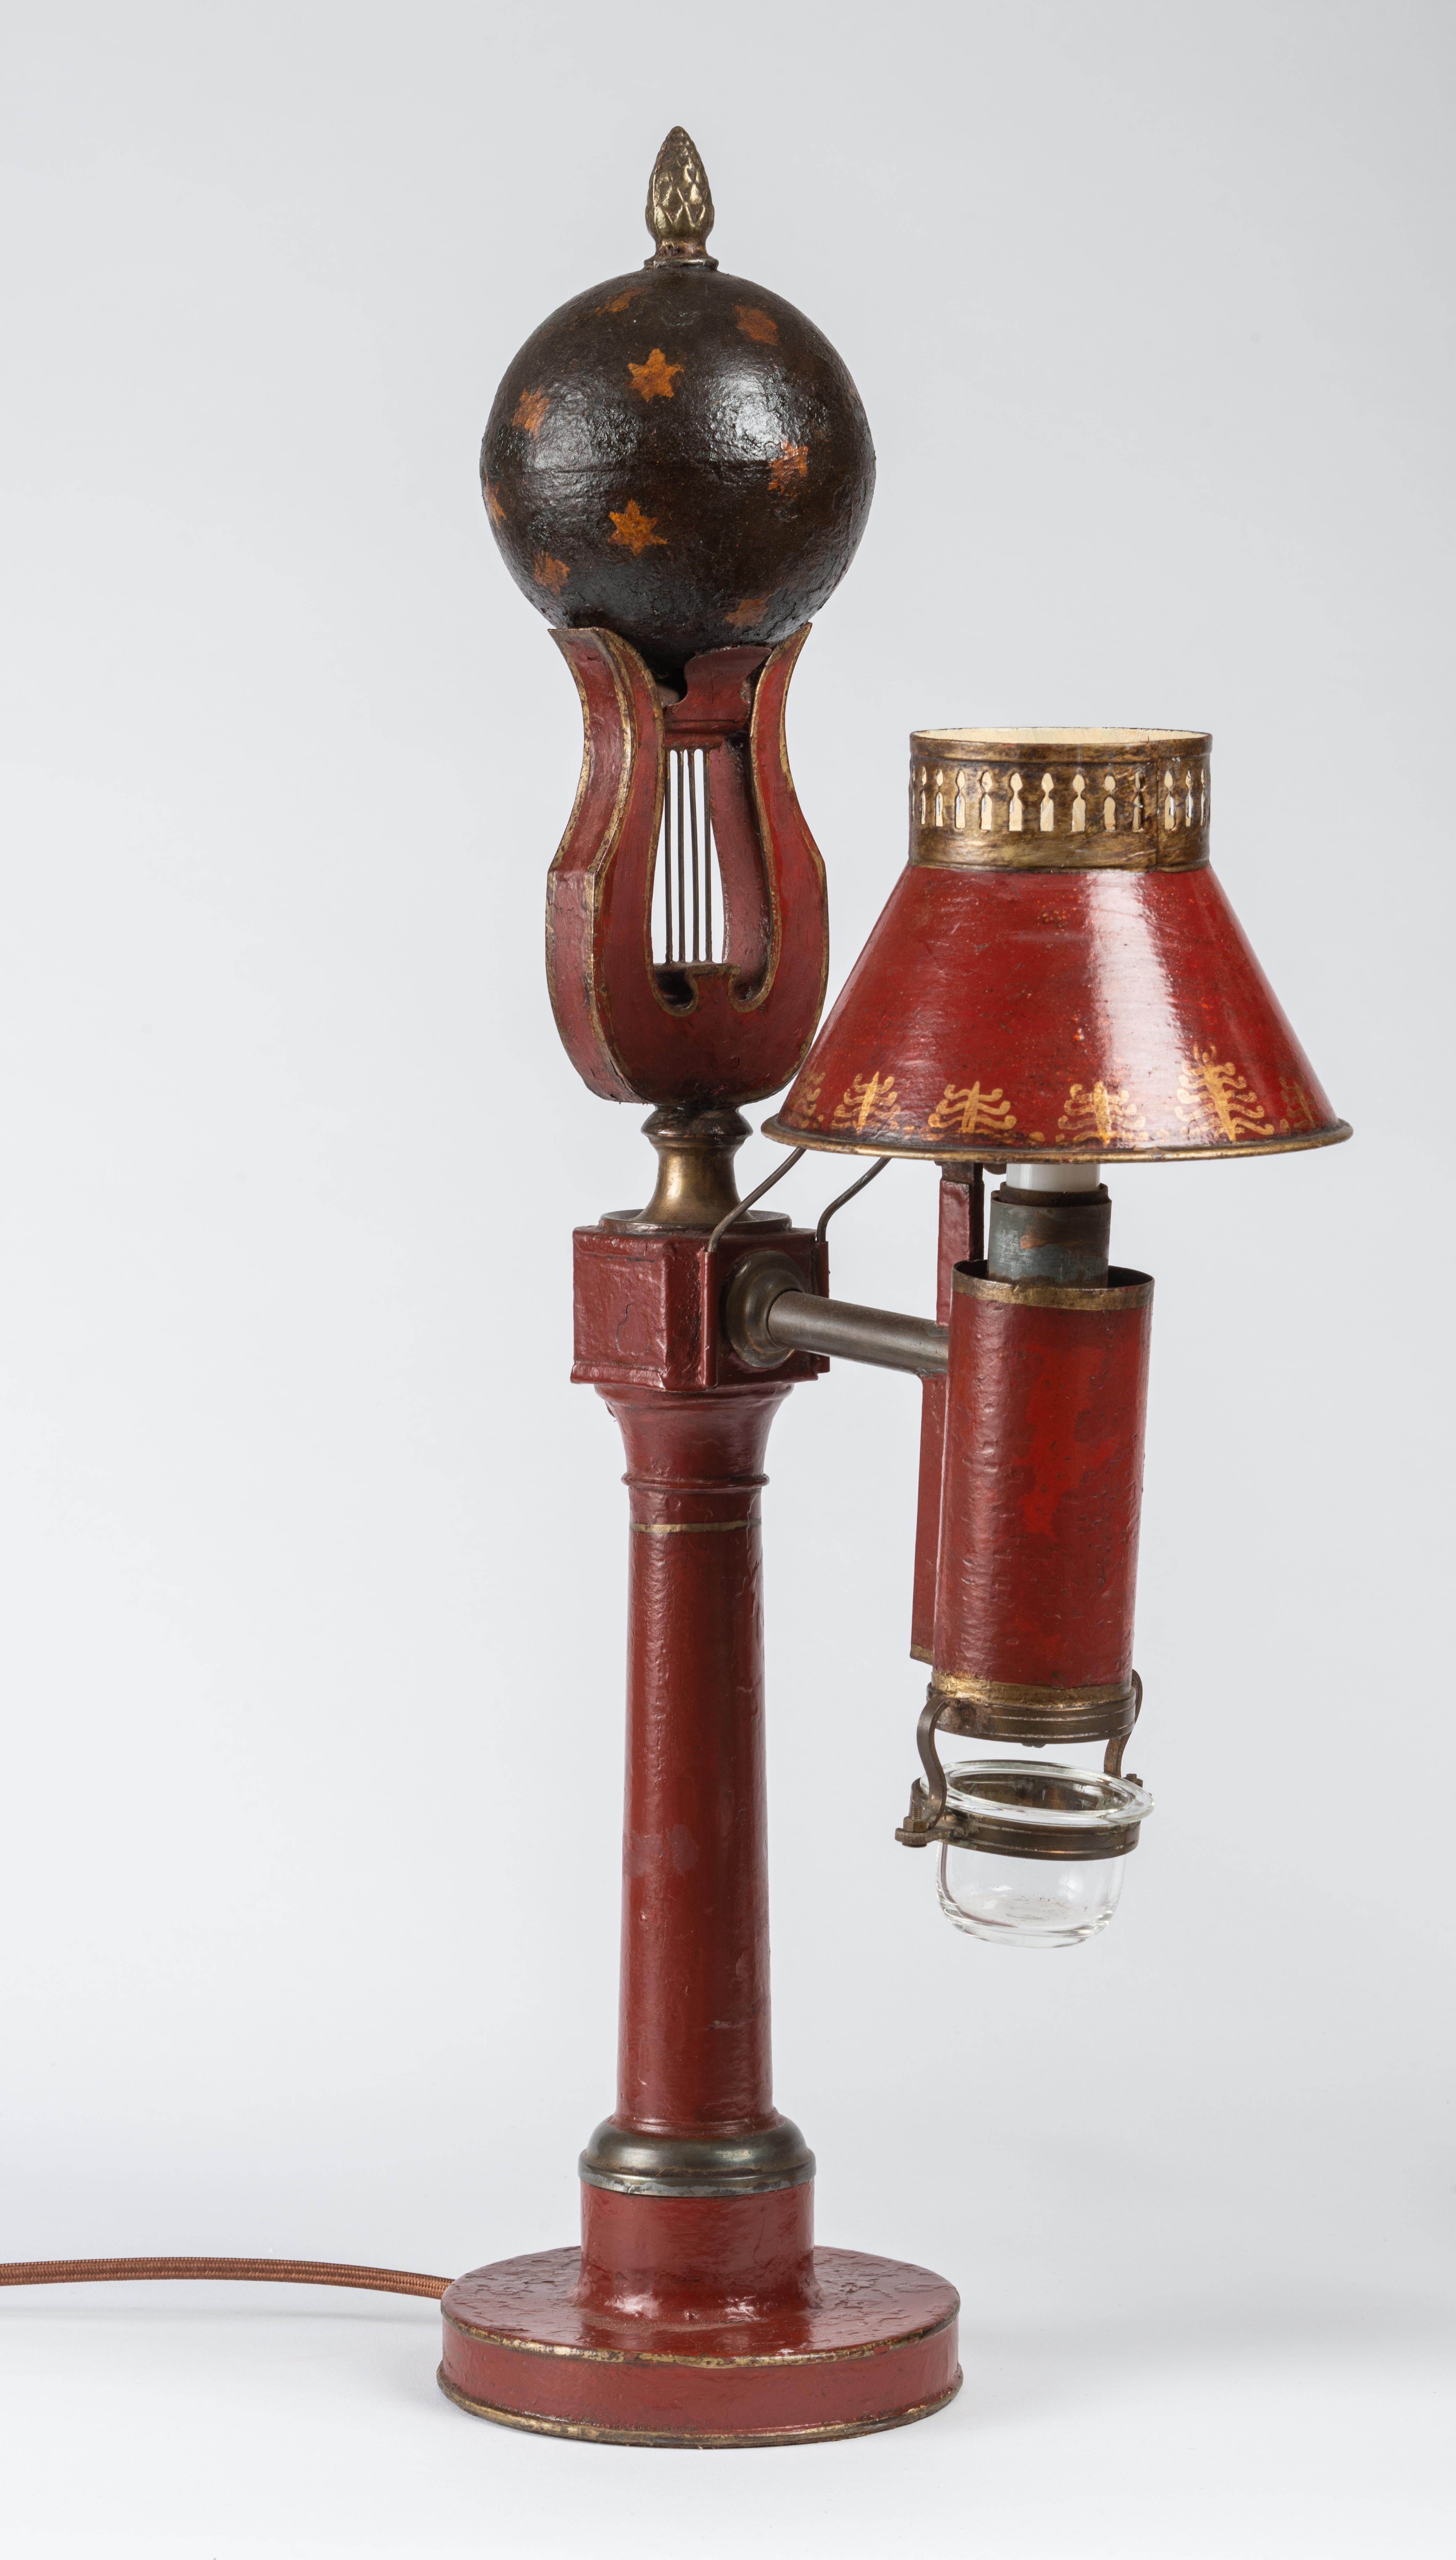 The red tole lamps with shades decorated with palms and ending in a lyre topped by a sphere painted with stars. With the original glass cups which would have caught the oil drip. Electrified.
The English version of the Quinquet lamp is the argand